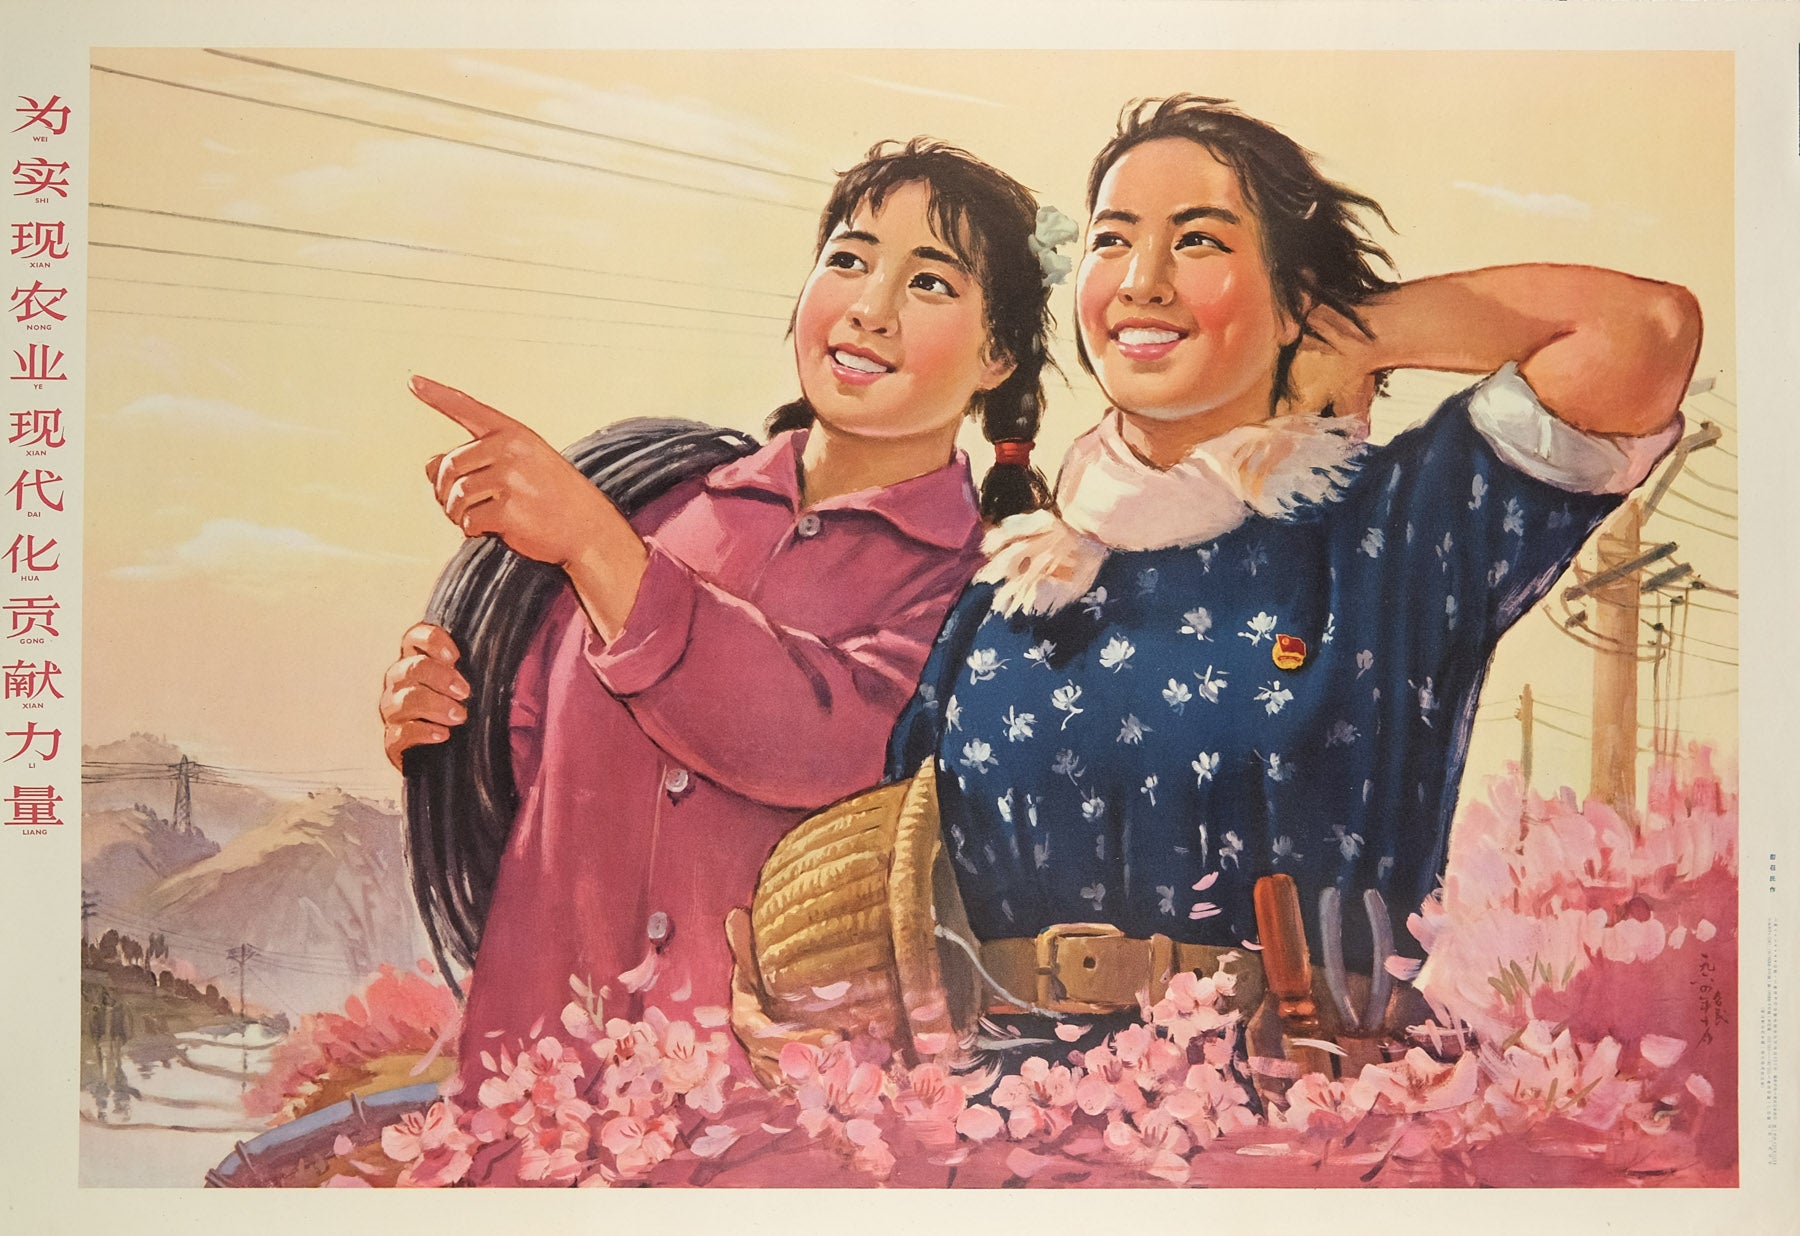 image of the original vintage 1965 Chinese communist propaganda poster by Peng Shaomin titled Contributing our strengths to carry out modernisation of agriculture published by Shanghai People's Fine Art Publishing House